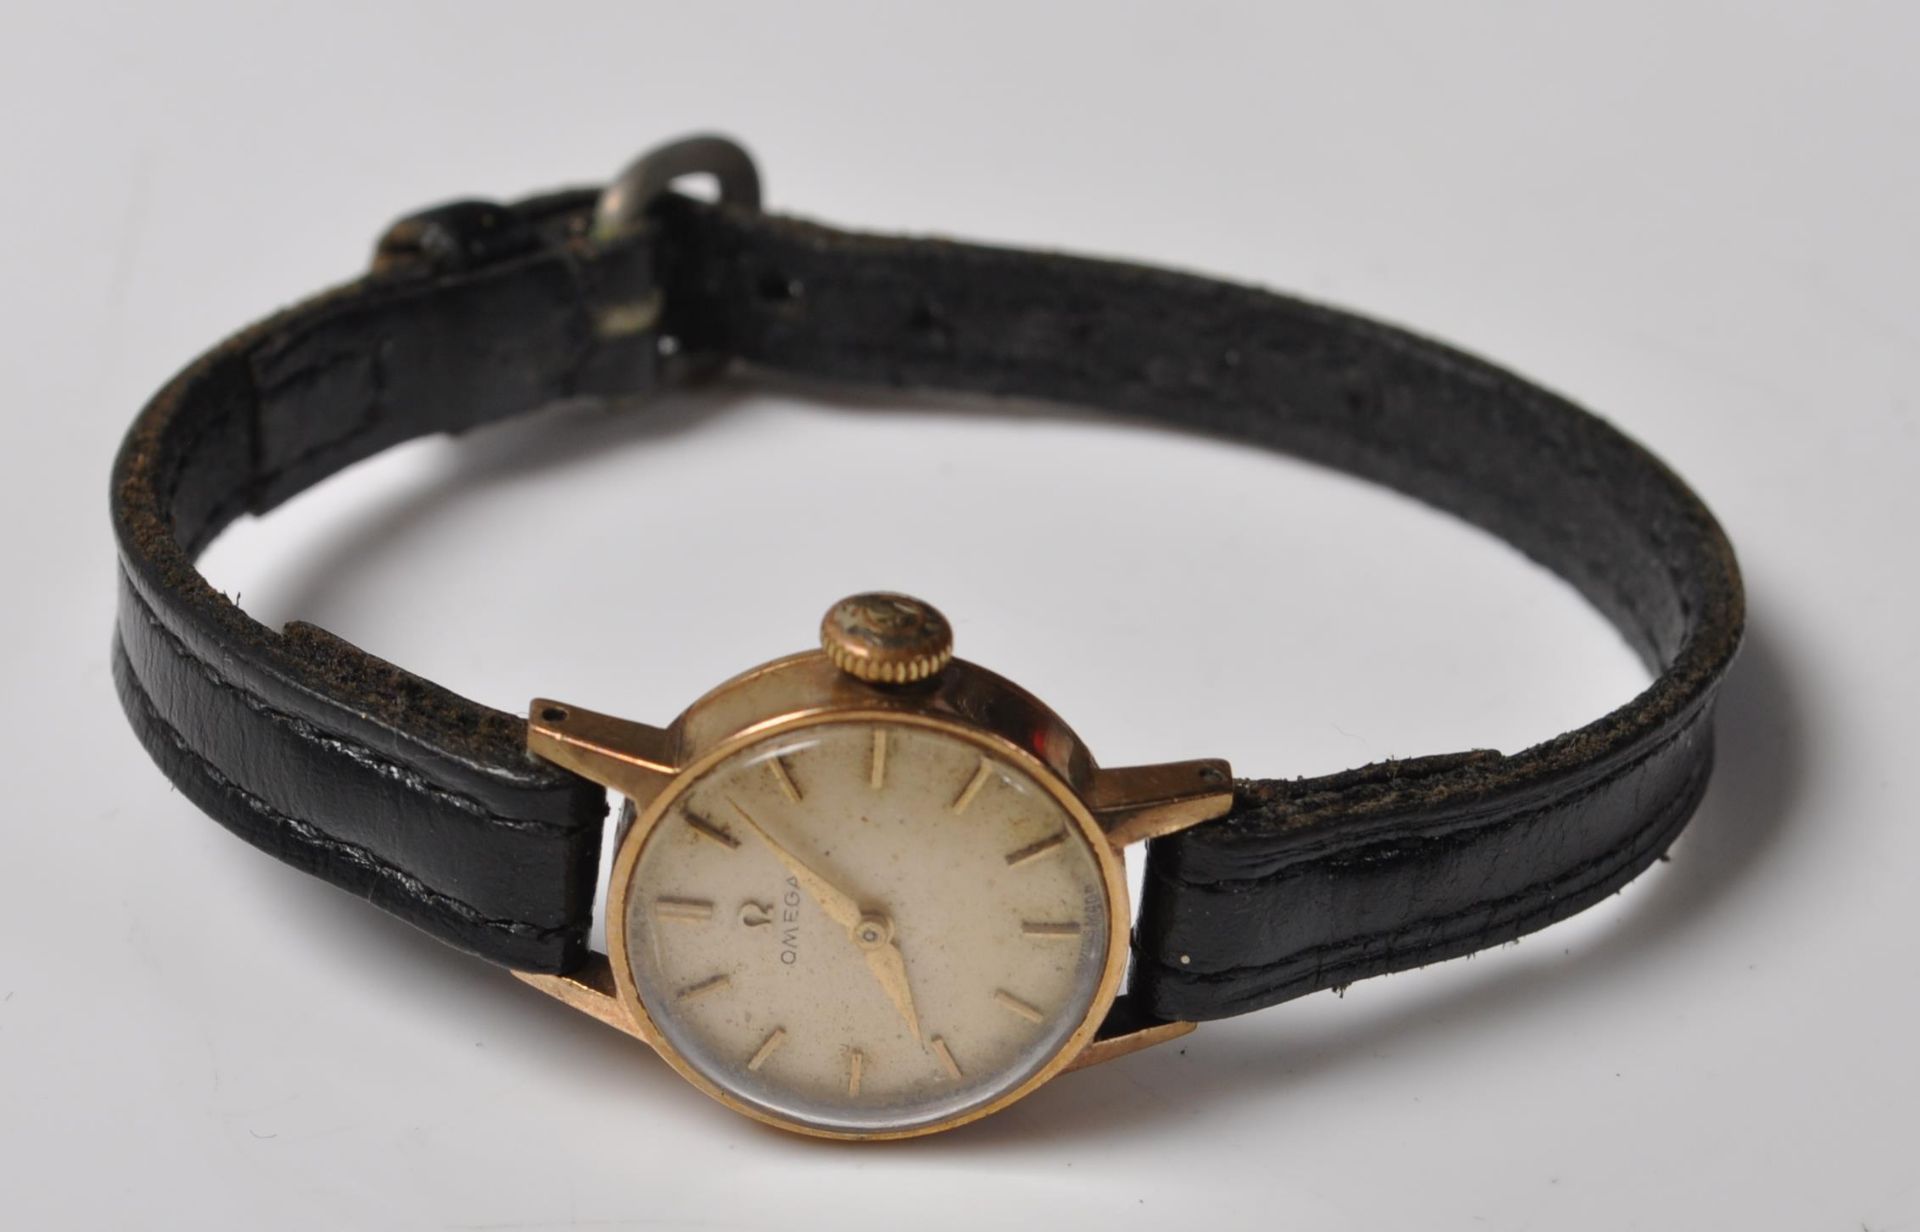 ORIGINAL 1960’S OMEGA COCKTAIL WRISTWATCH WITH 9CT GOLD CASE